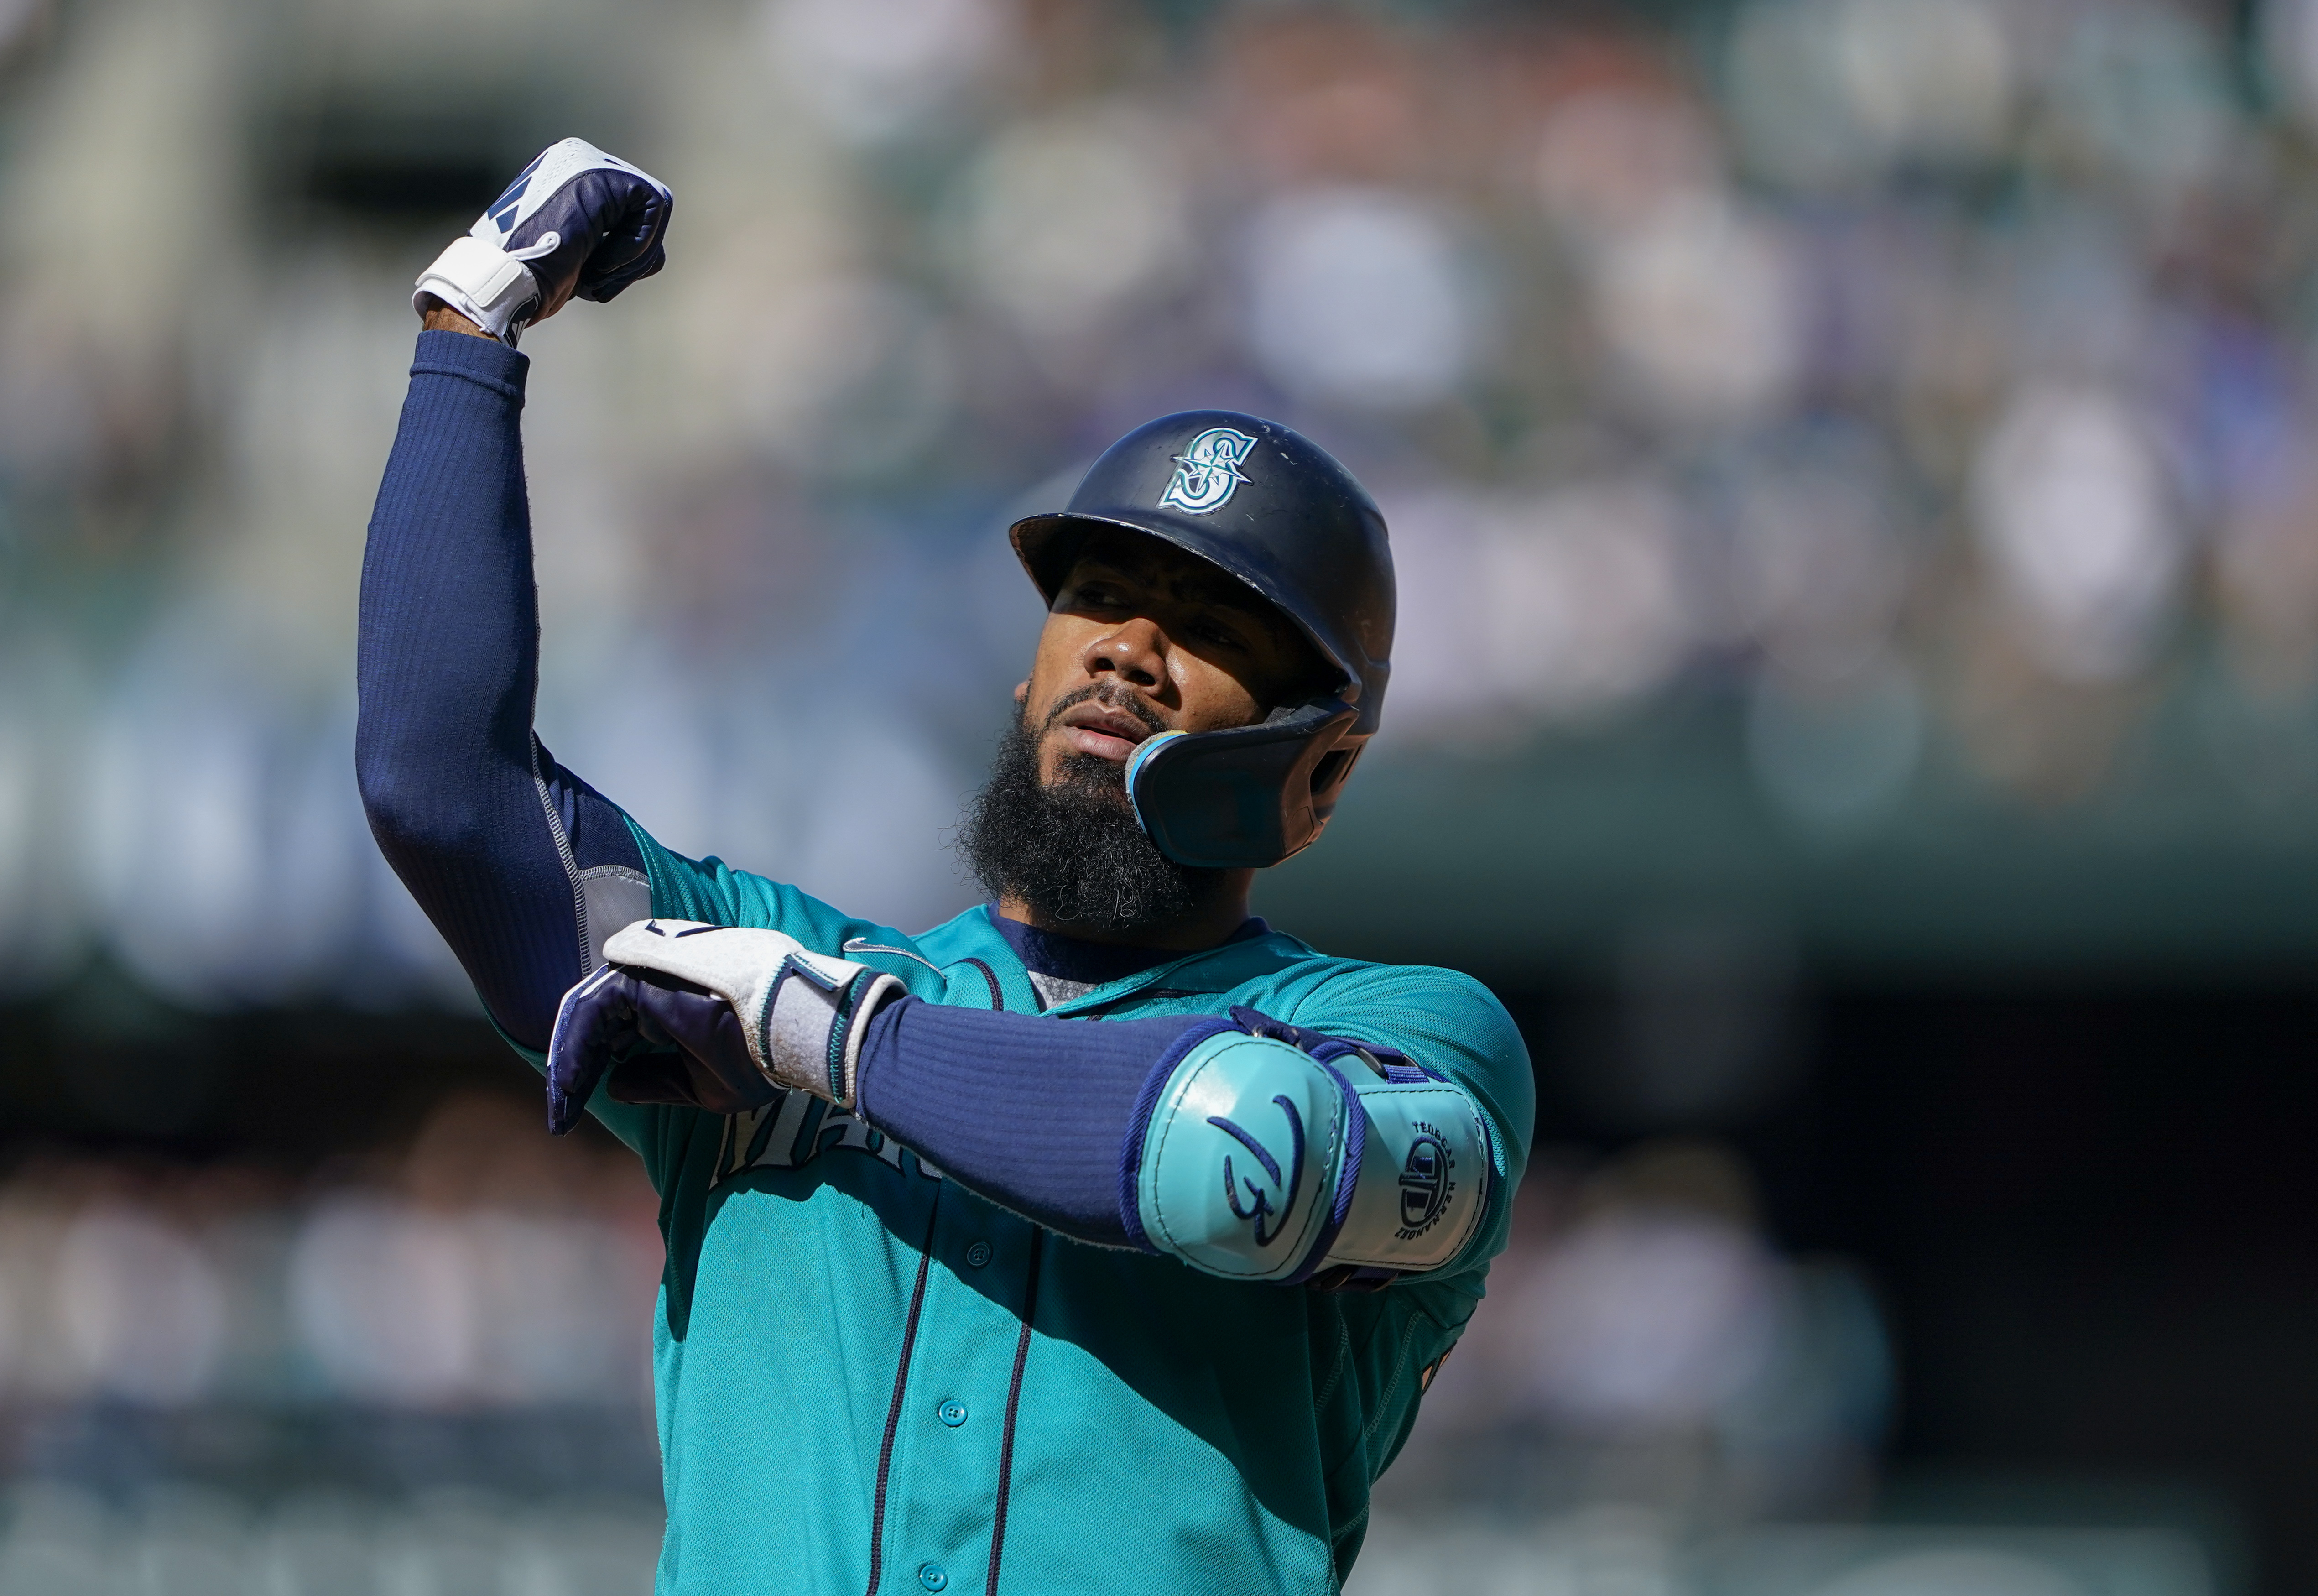 ANAHEIM, CA - JUNE 10: Seattle Mariners center fielder Julio Rodriguez (44)  raises a trident in the air after hitting a two run home run during an MLB  baseball game against the